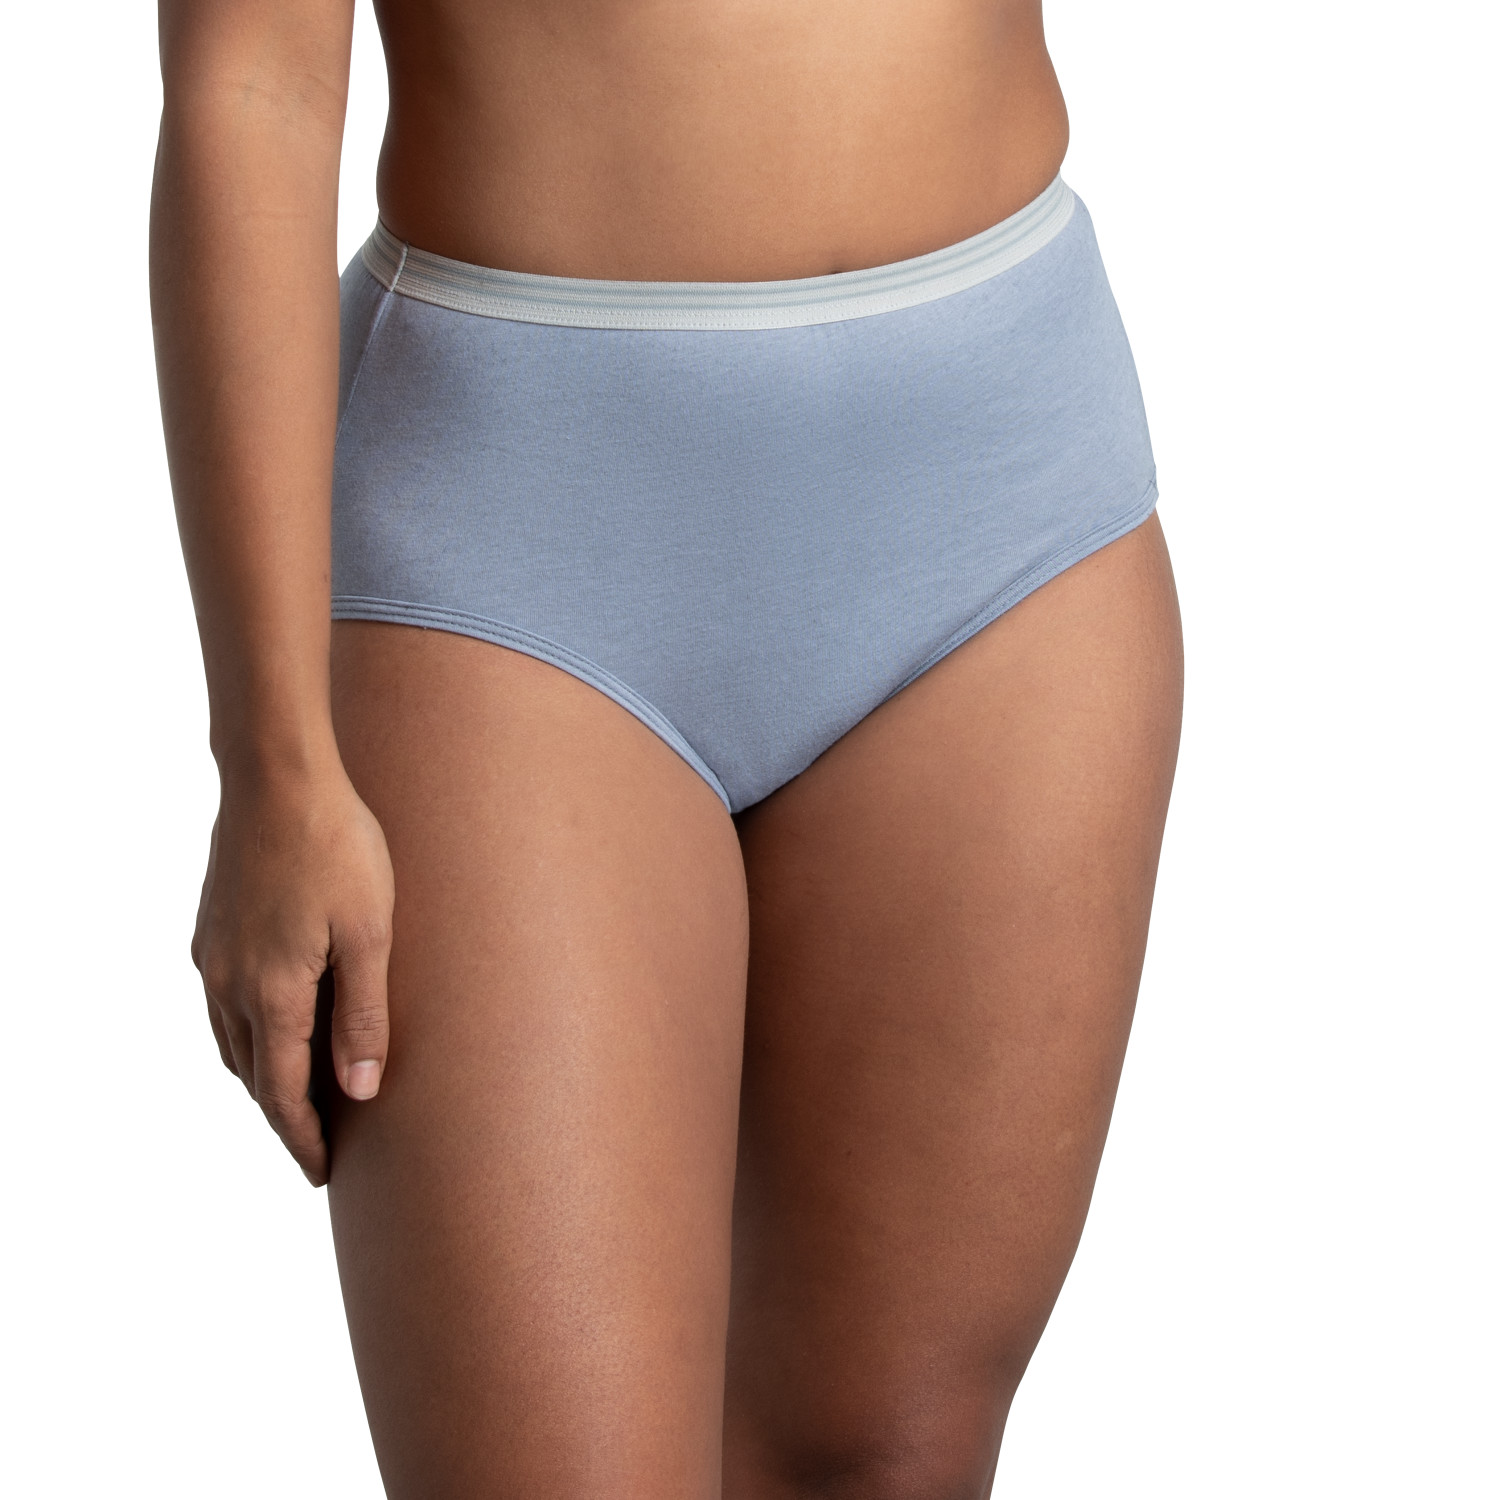 Fruit of the Loom Women's Assorted Cotton Brief Underwear, 6 Pack - image 4 of 14